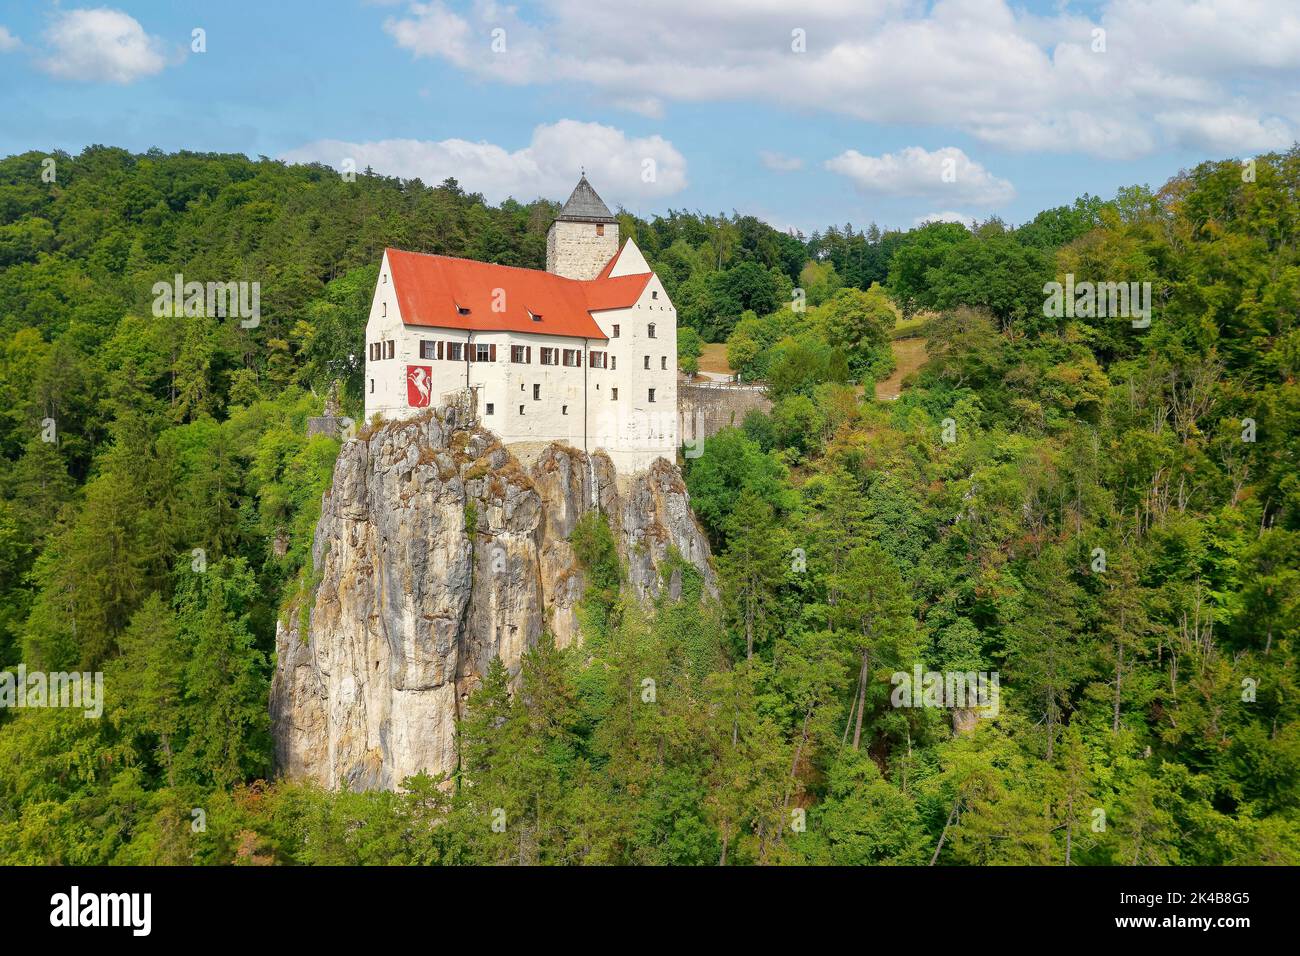 Prunn Castle, hilltop castle, first mentioned in 1037, stands on steep limestone cliff on Main-Danube Canal, Schlossprunn, district of Riedenburg Stock Photo